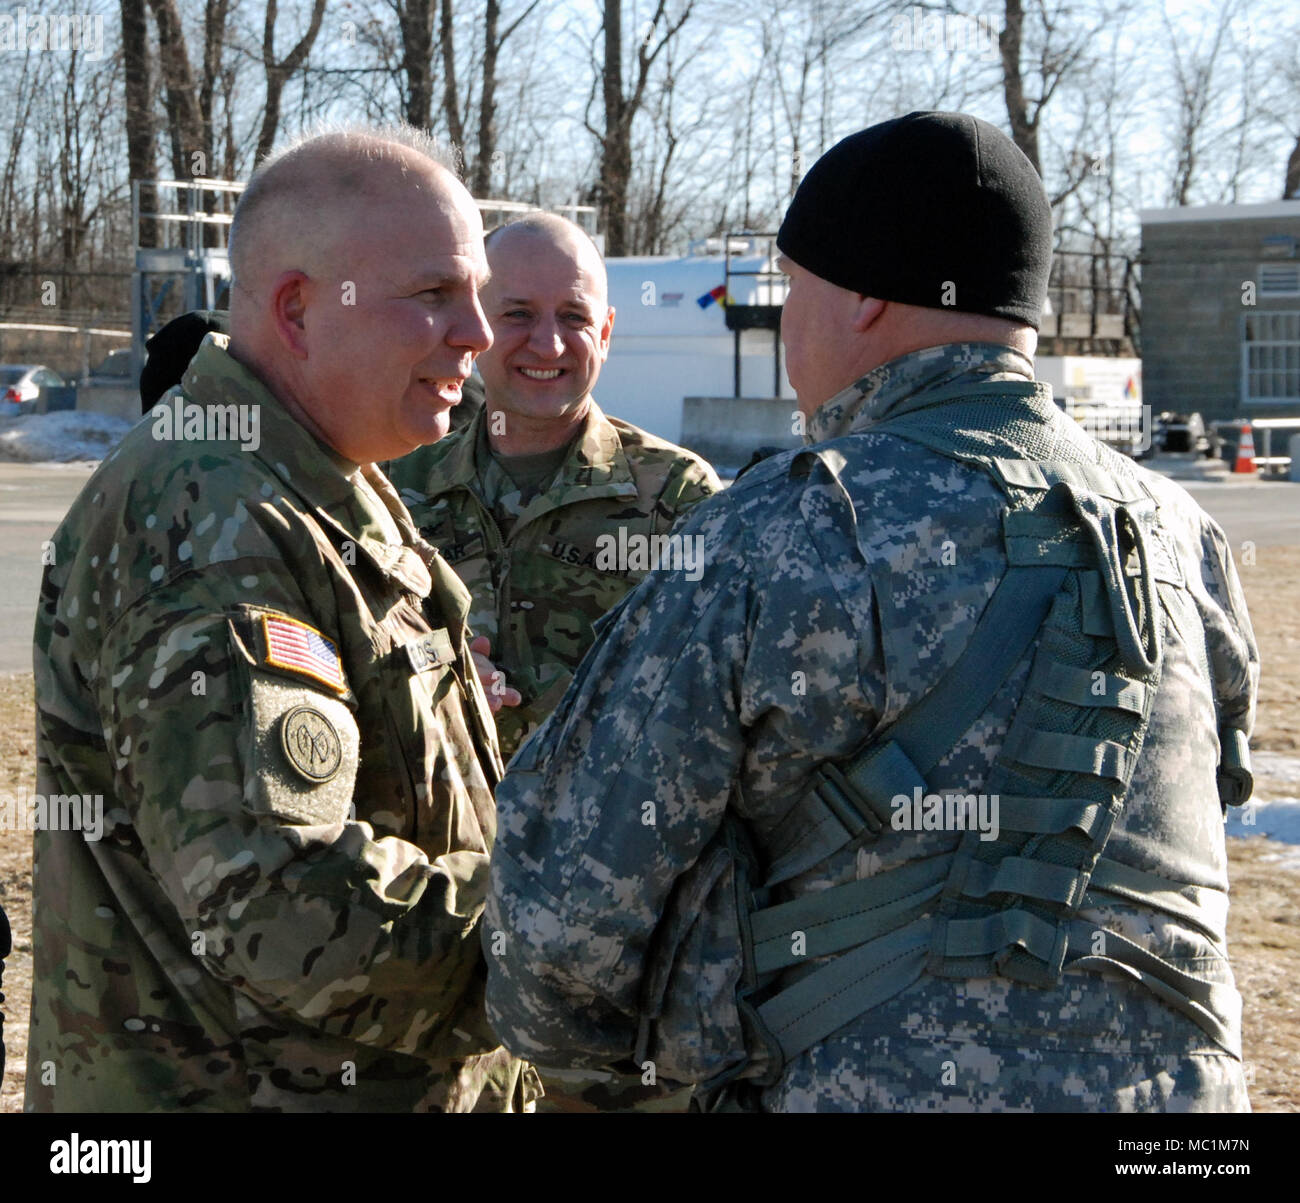 Major General Ray Shields (left), the commanderof the New York Army National Guard, congratulates Chief Warran Officer 5 Michael Johnson at the conclusion of his 'Final Flight' as an Army Pilot at Army Aviation Support Facility #3 in Latham, N.Y. on Jan. 25, 2018 as Col. Mark Slusar, the New York State Aviation Officer, looks on. Johnson celebrated his final flight after 35 years of service. ( U.S.Army National Guard Photo by Eric Durr) Stock Photo